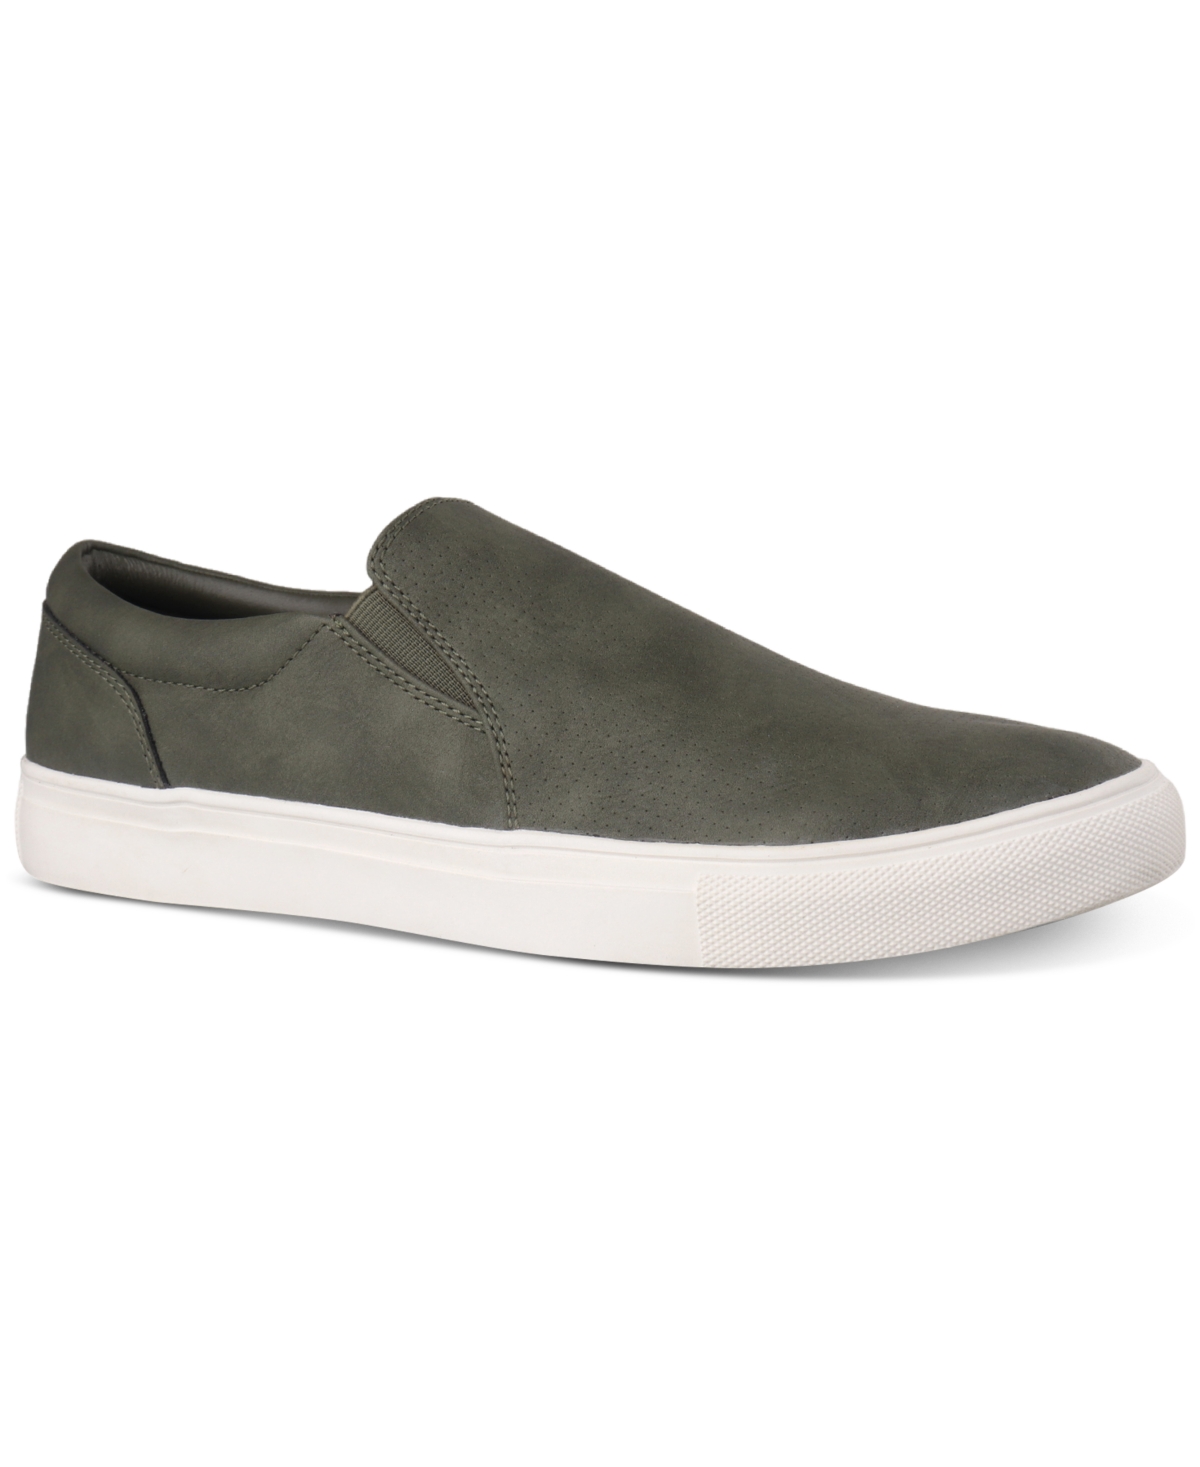 Men's Thomas Slip-On Sneakers, Created for Macy's - Green